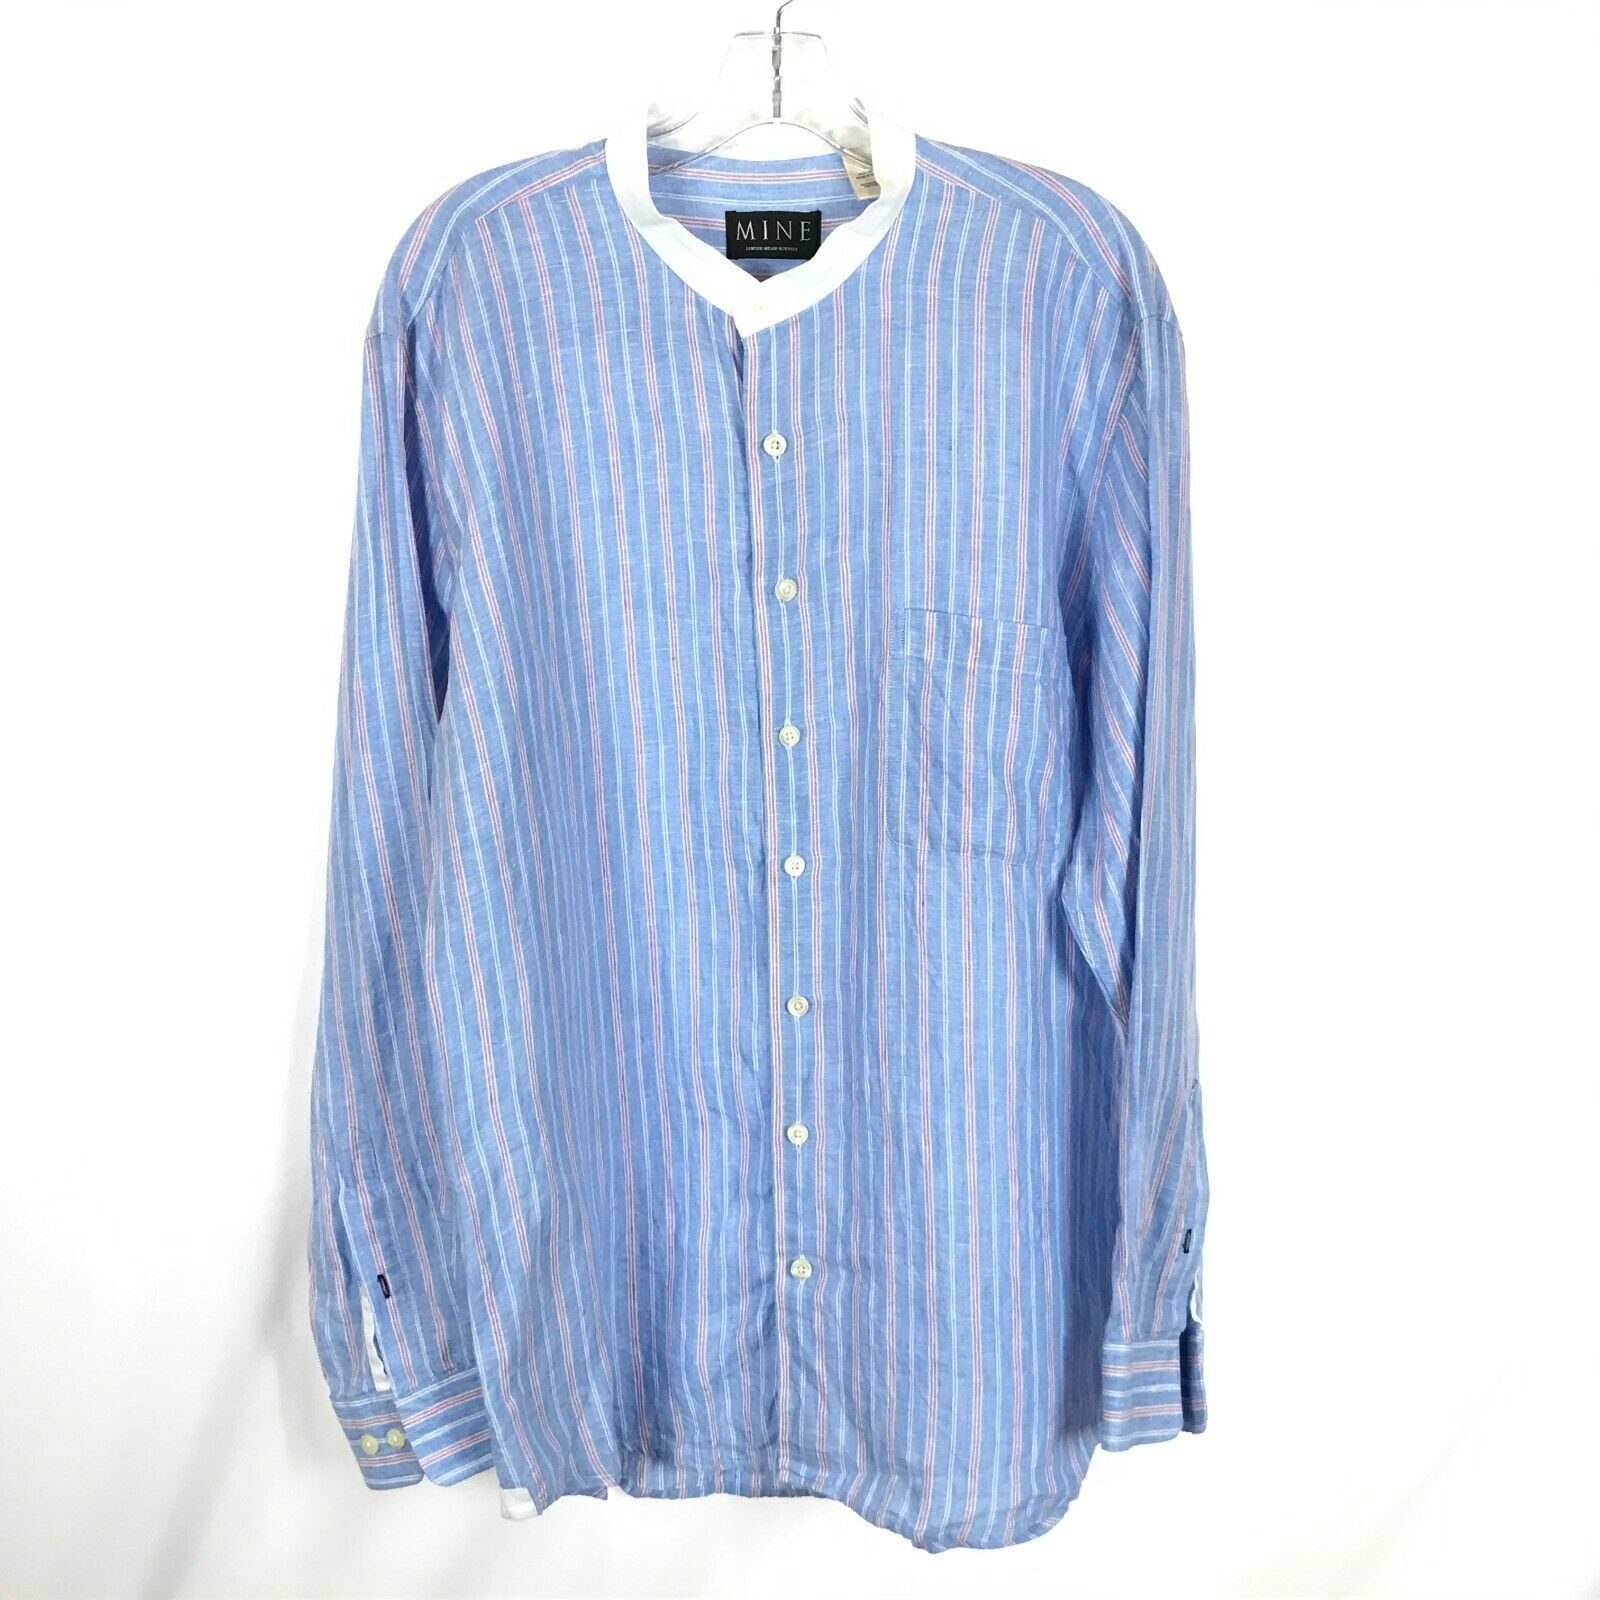 Primary image for Mens Size Large MINE Blue Pure Linen Striped Stand Collar Shirt